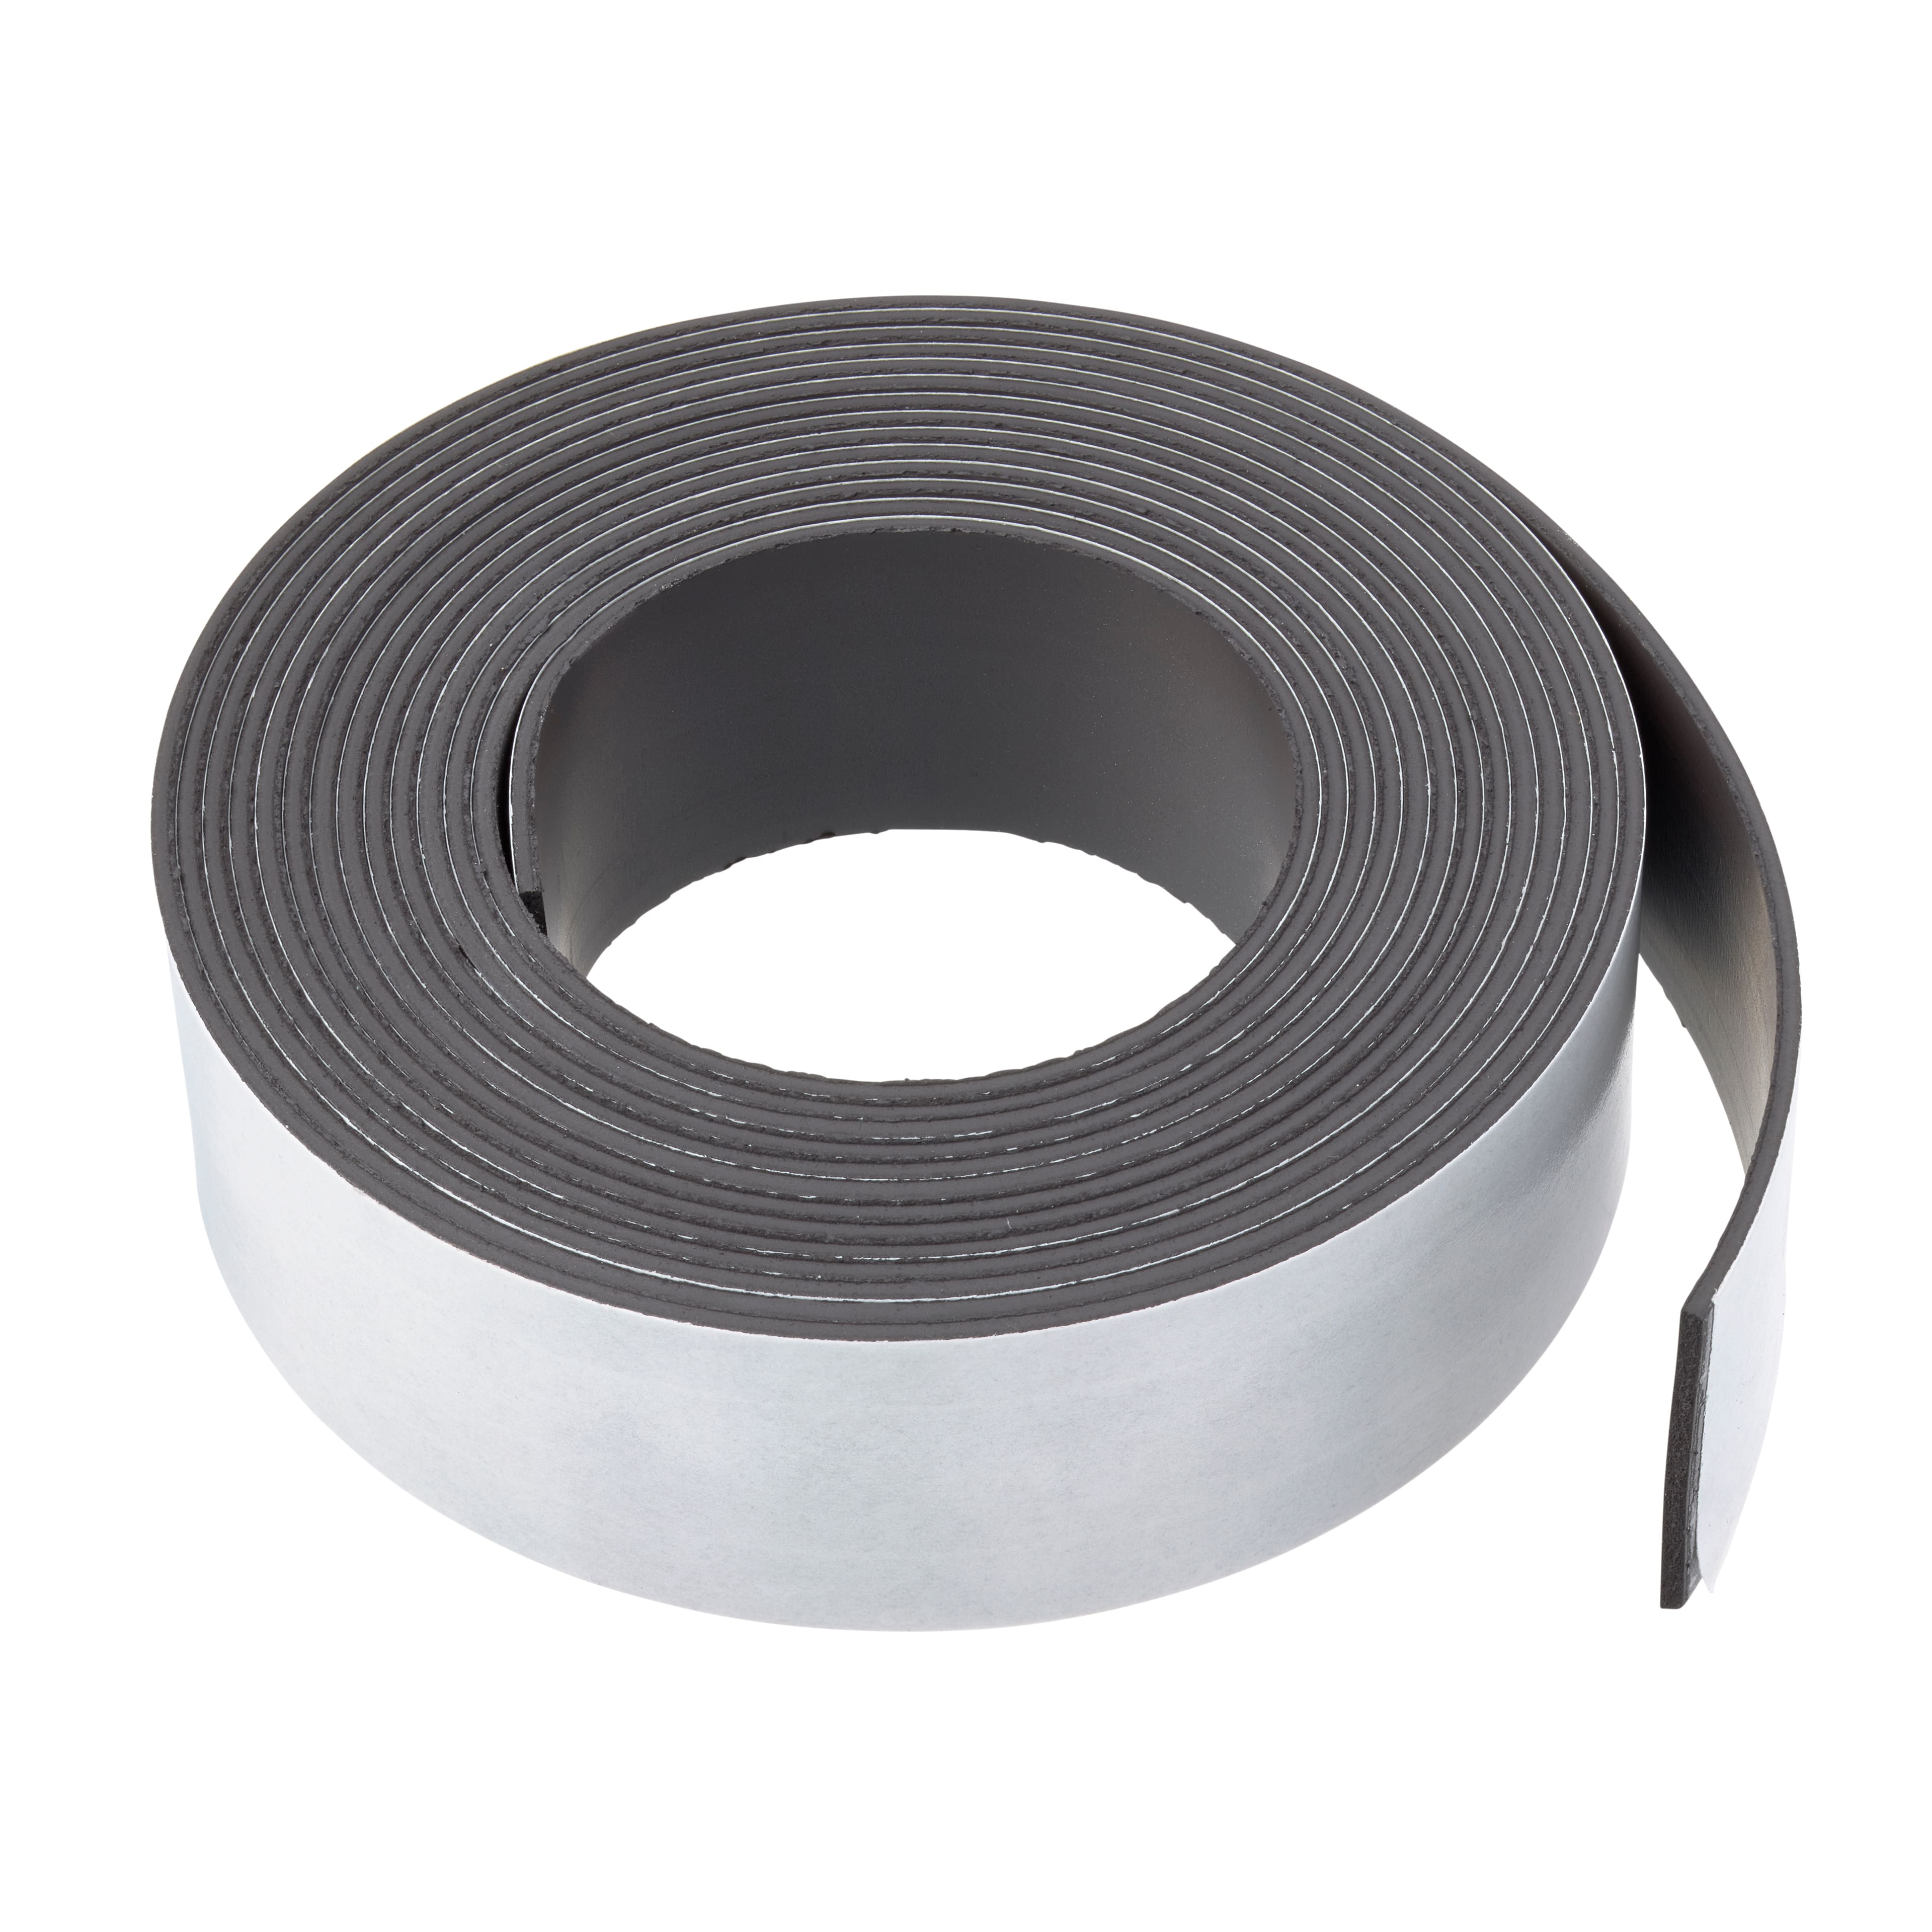  Flexible Adhesive Magnetic Tape - 1 in x 10 ft